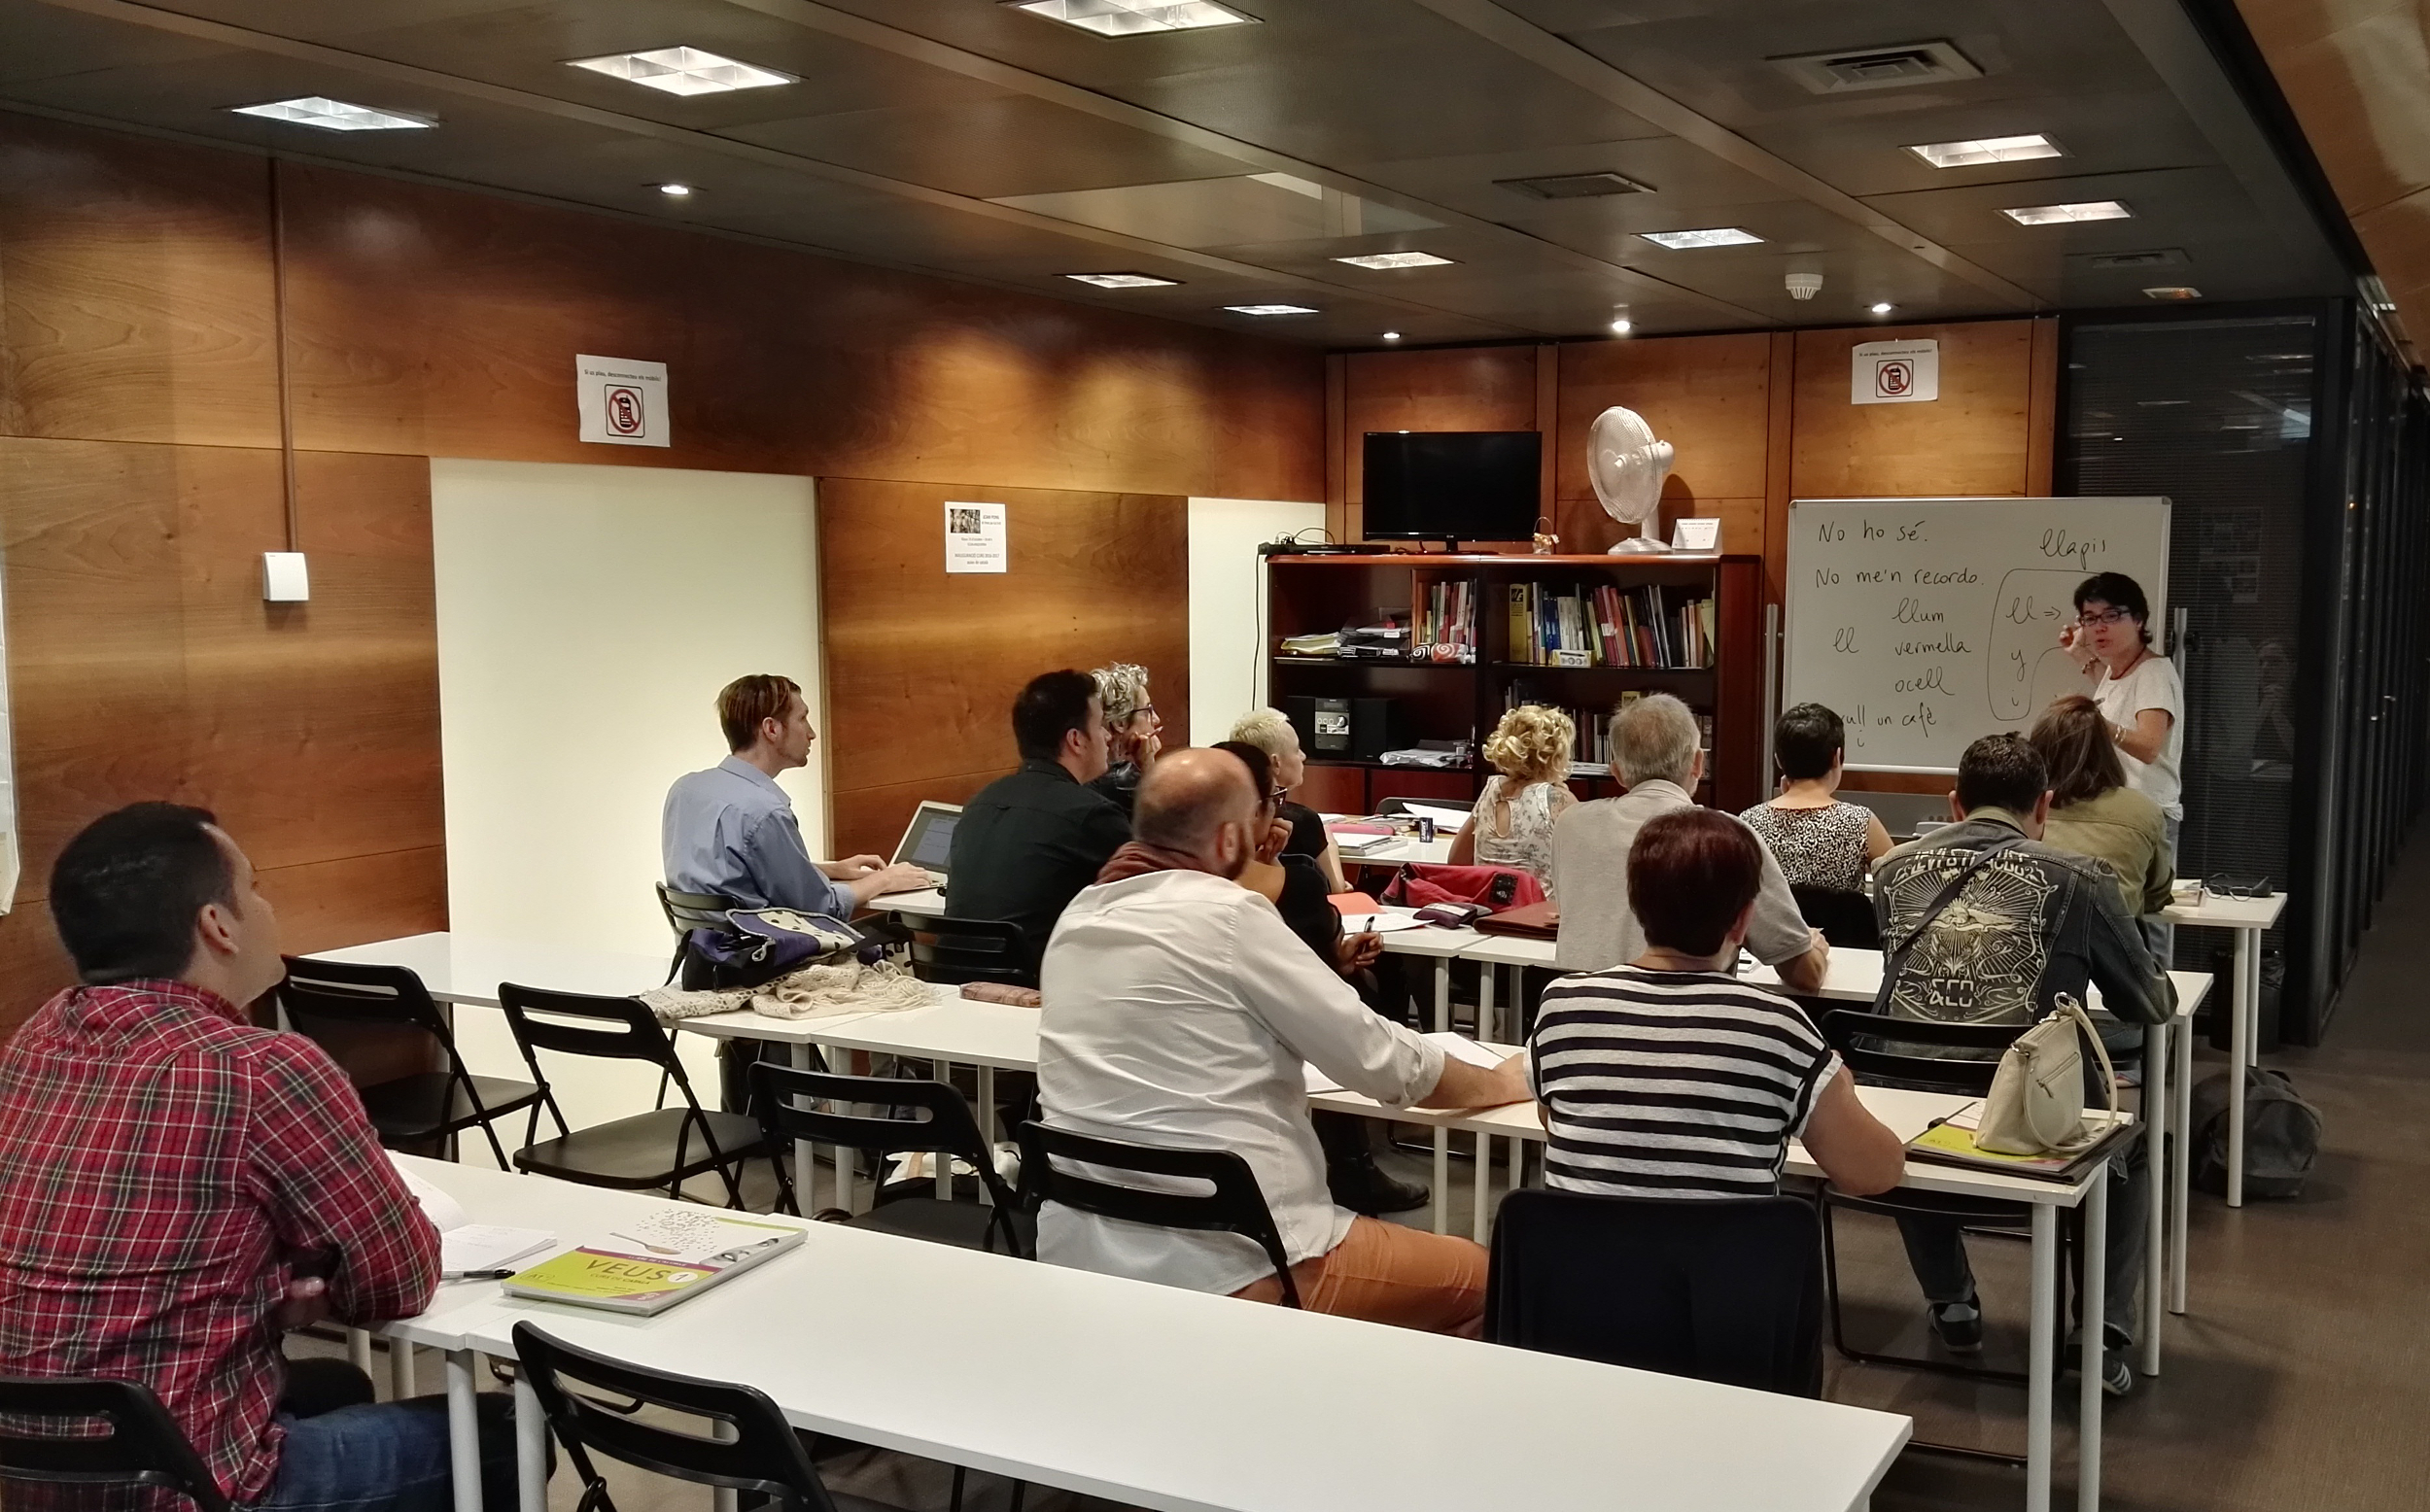 Catalan language students at Madrid's Blanquerna Cultural Center and Bookstore (Blanquerna)